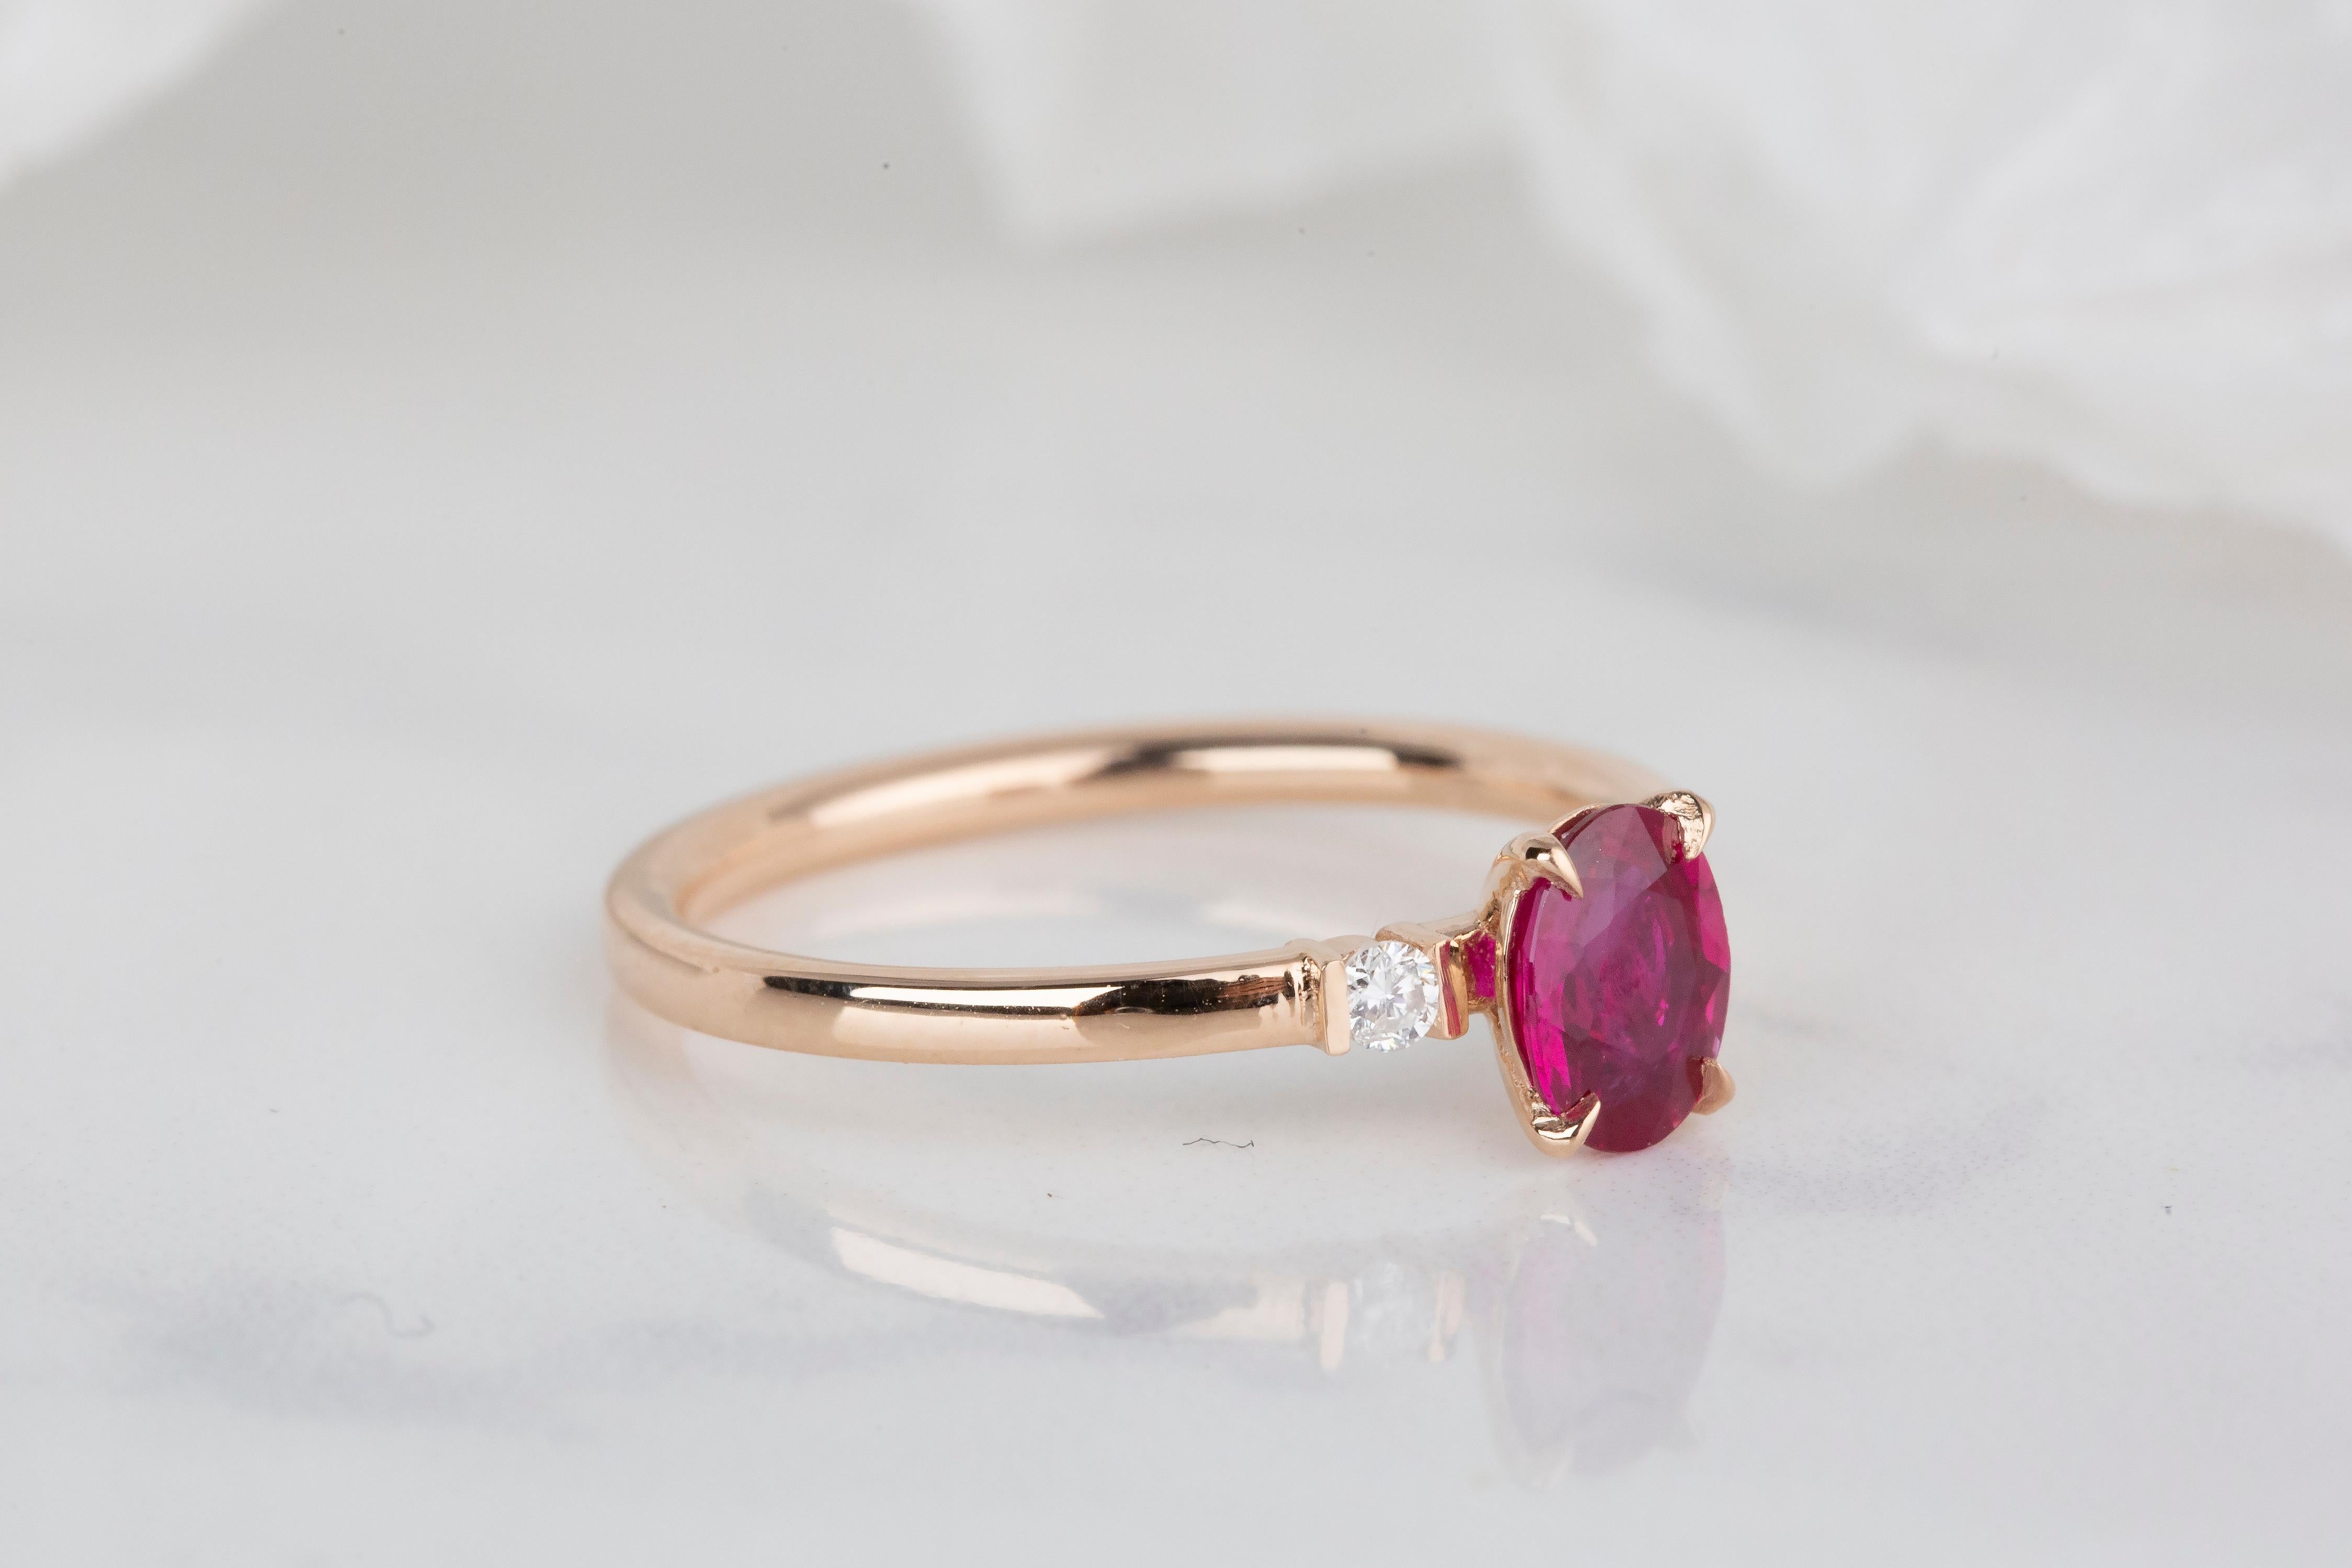 For Sale:  14k Rose Gold 0.80 Ct. Oval Ruby and Diamond Ring 6